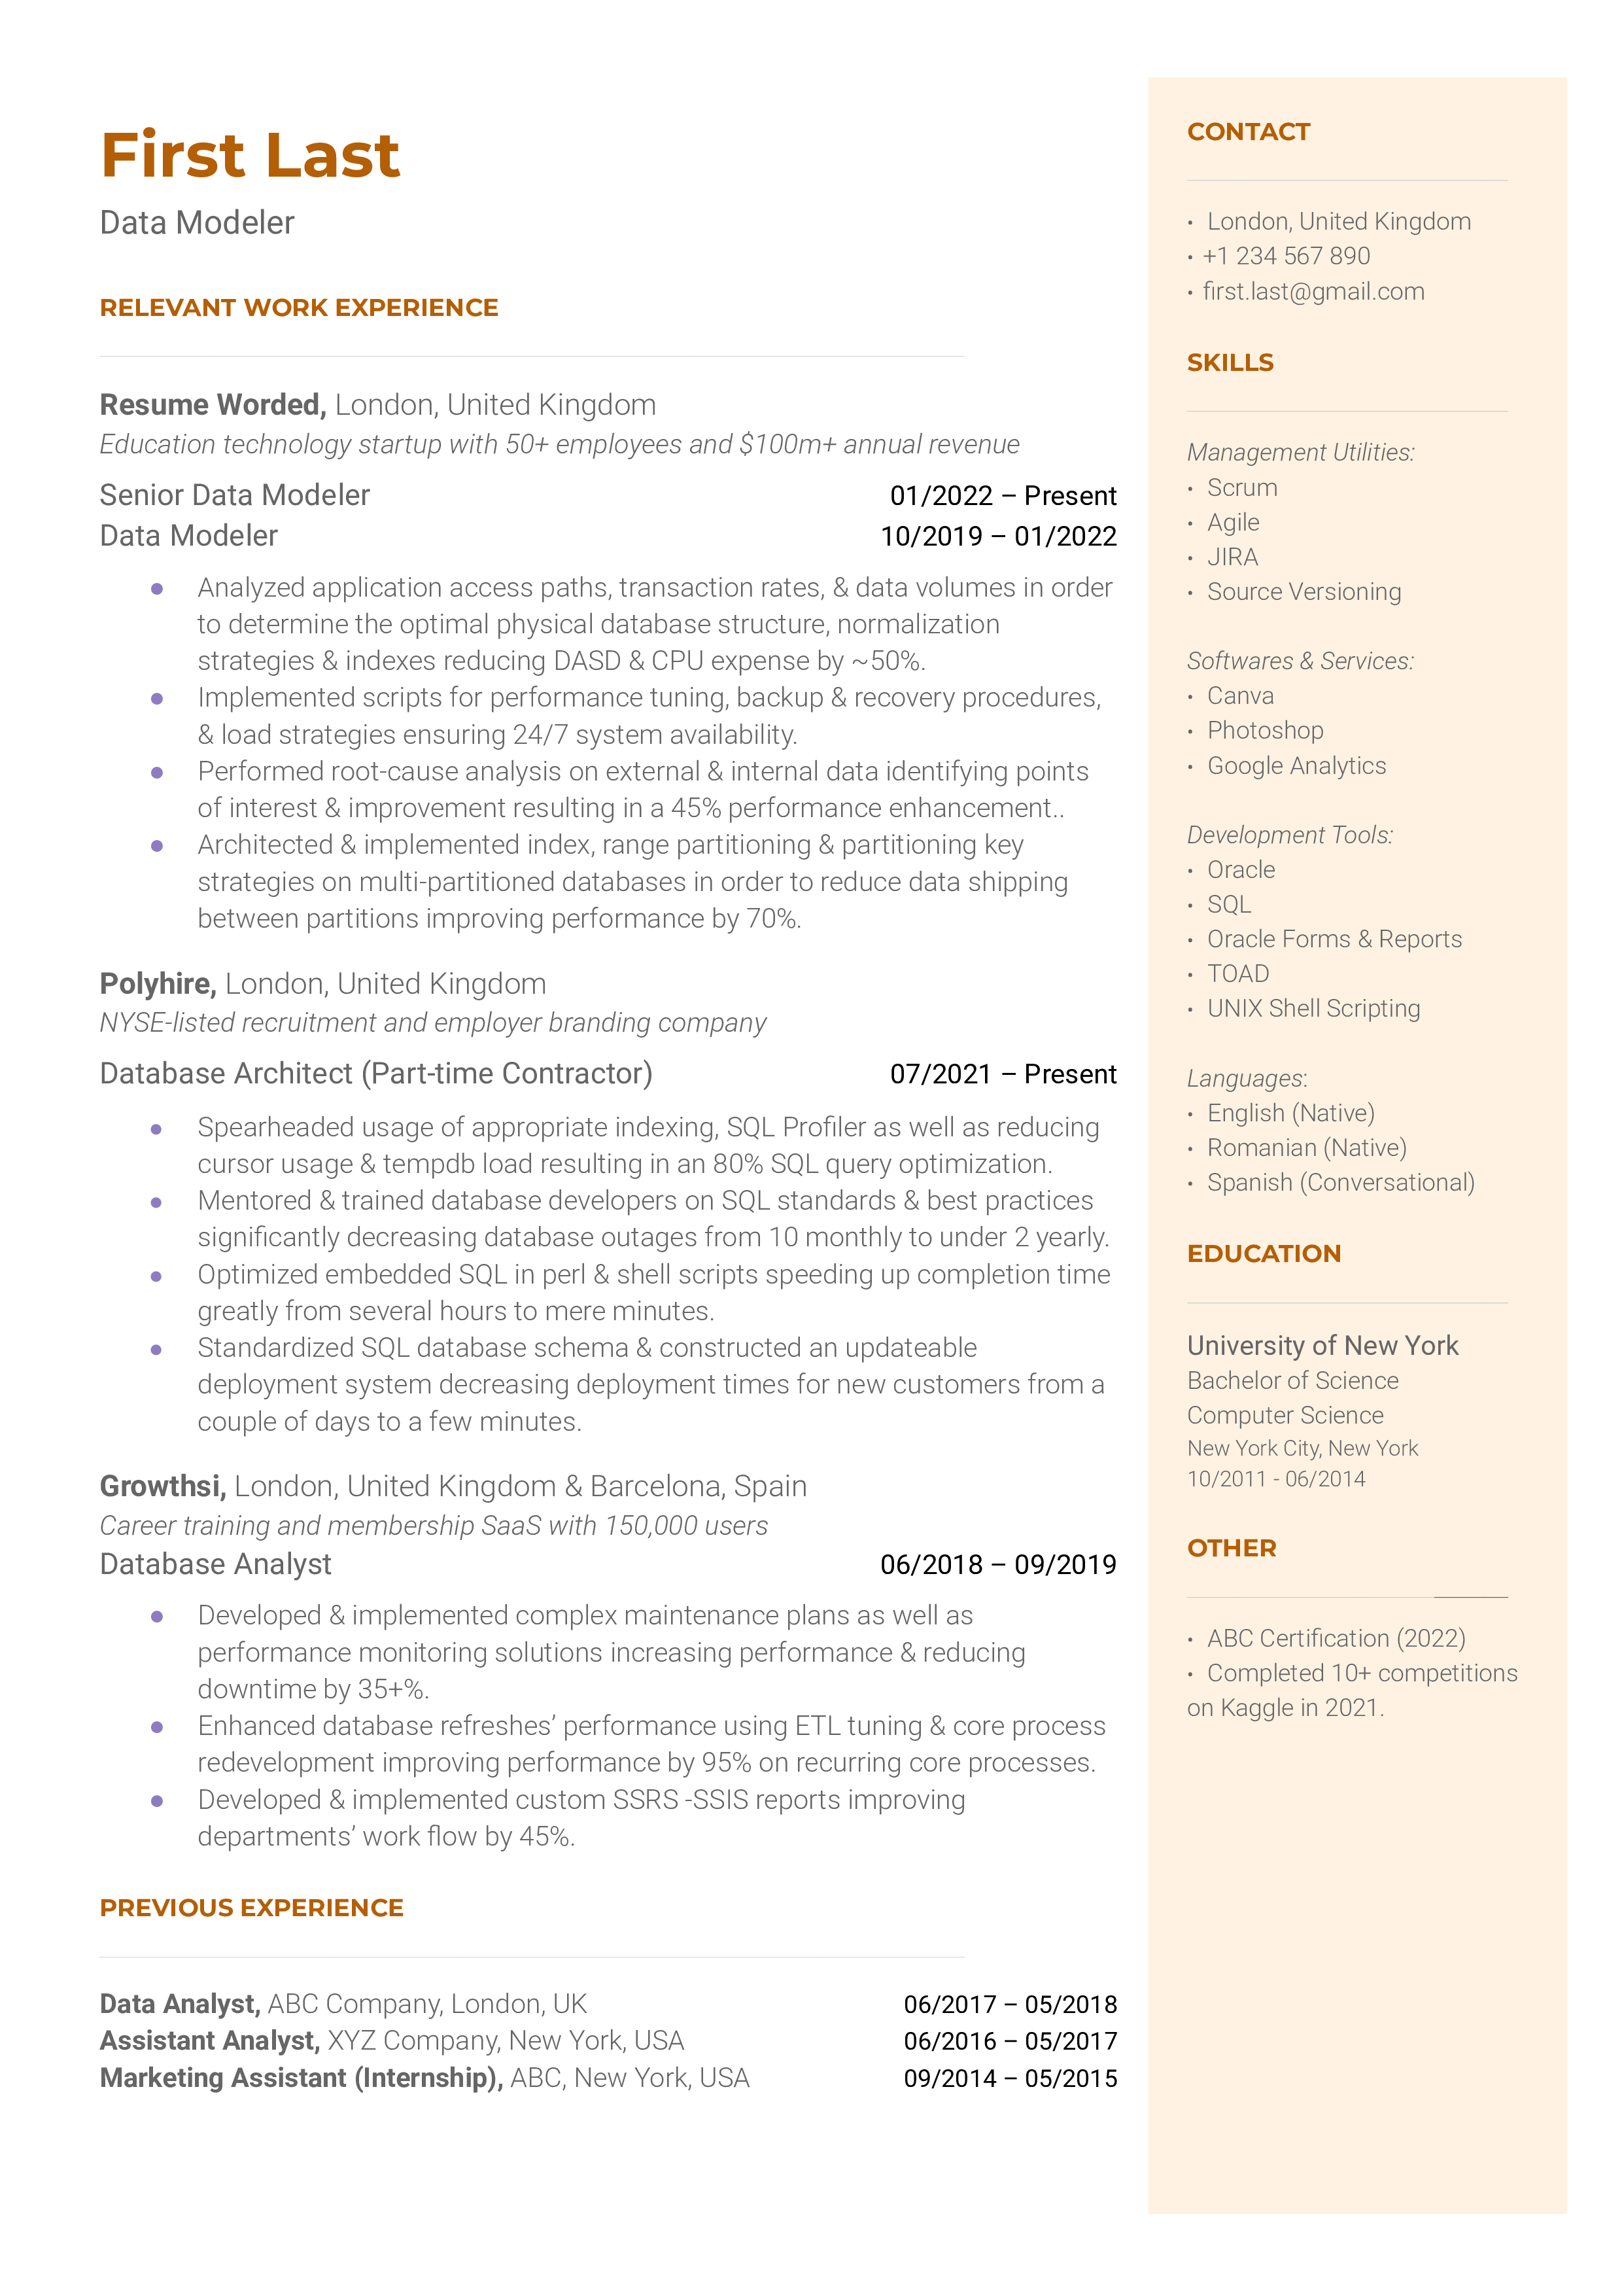 A well-crafted Data Modeler CV showcasing relevant skills and project experiences.